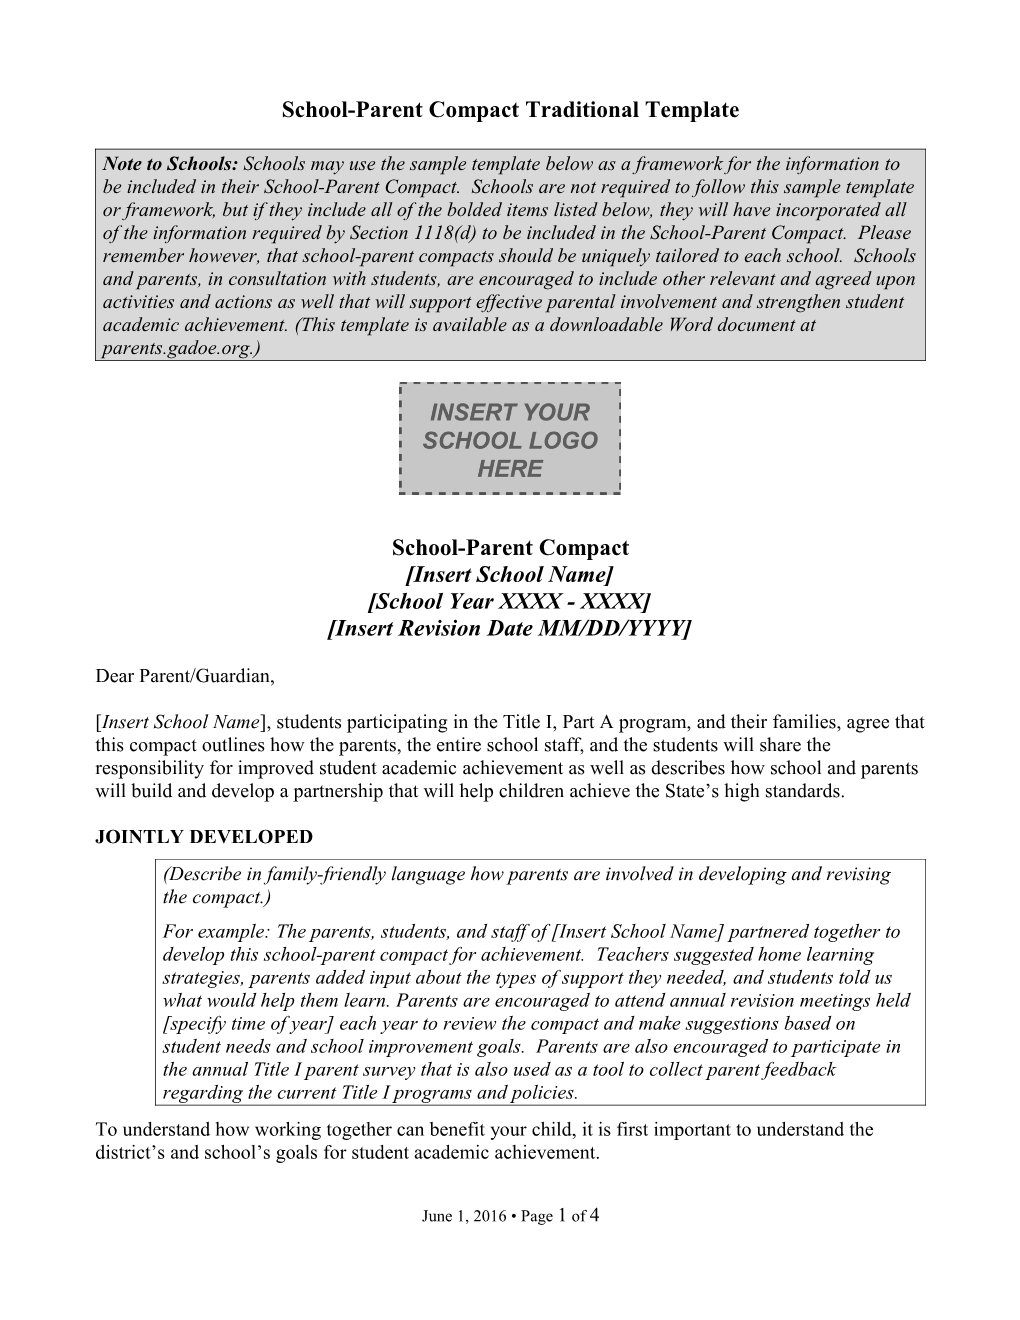 School-Parent Compact Traditional Template